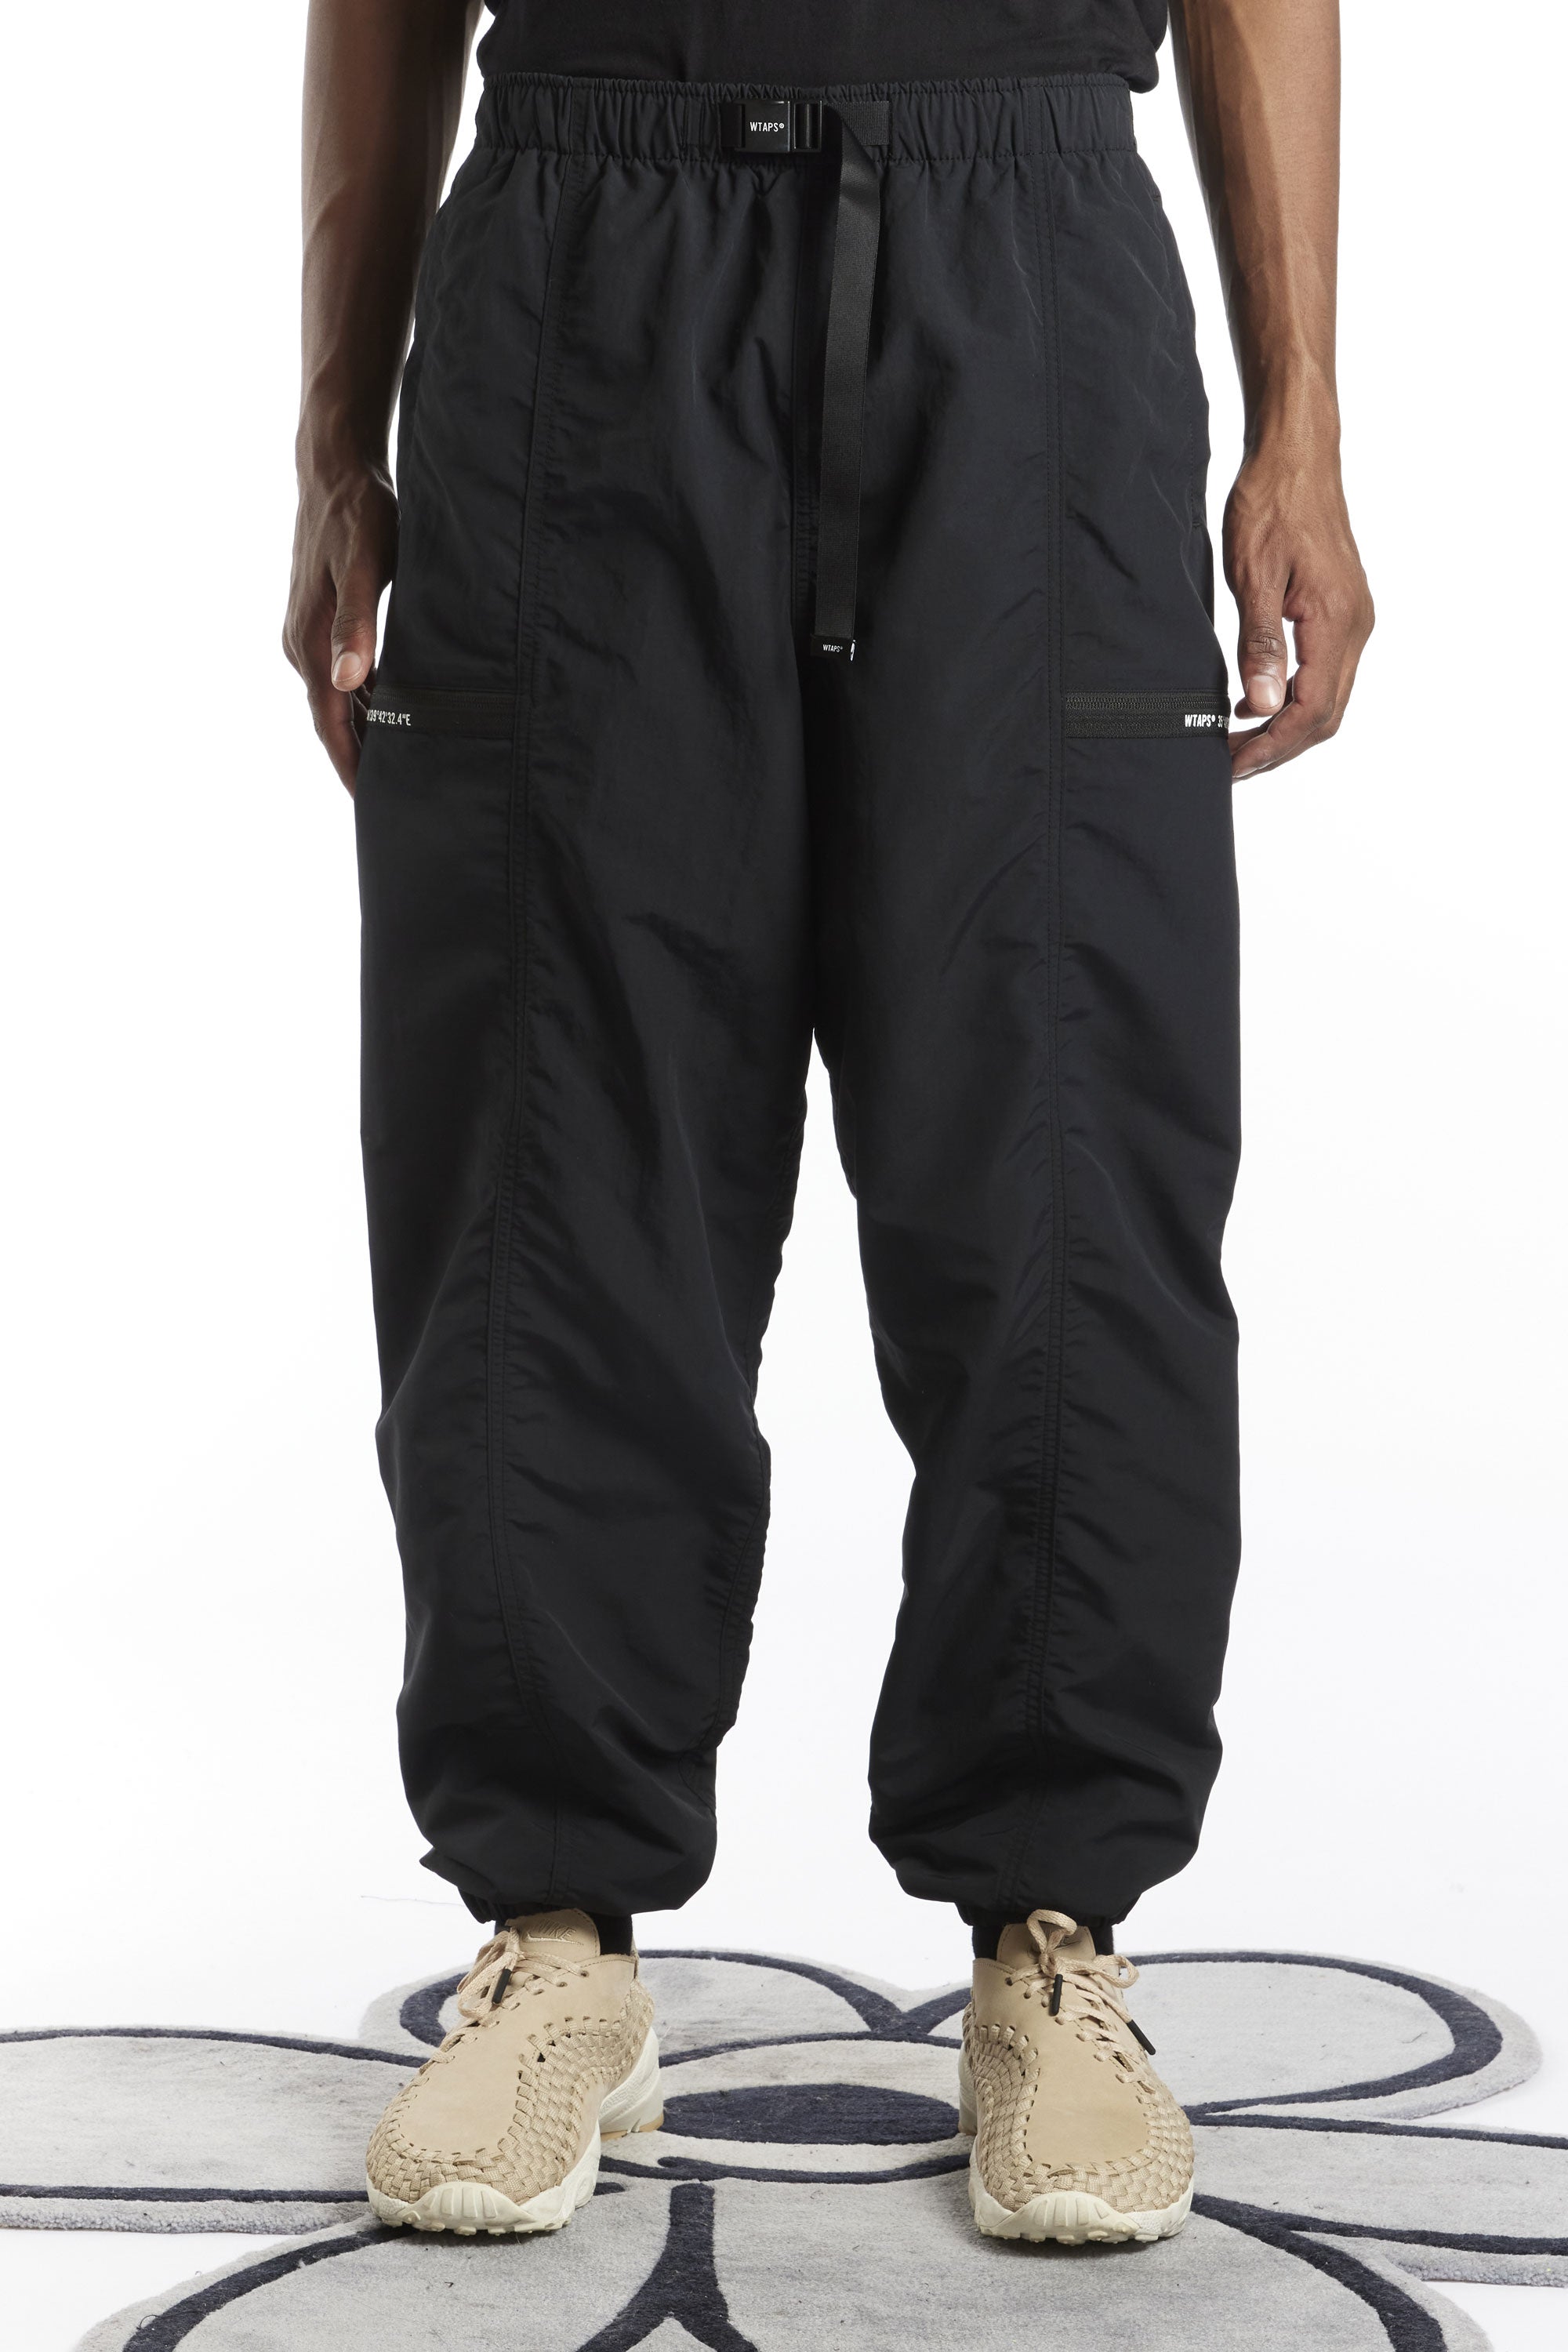 WTAPS - MILT9601 TROUSERS COTTON POLY TWILL – P.A.M. (Perks